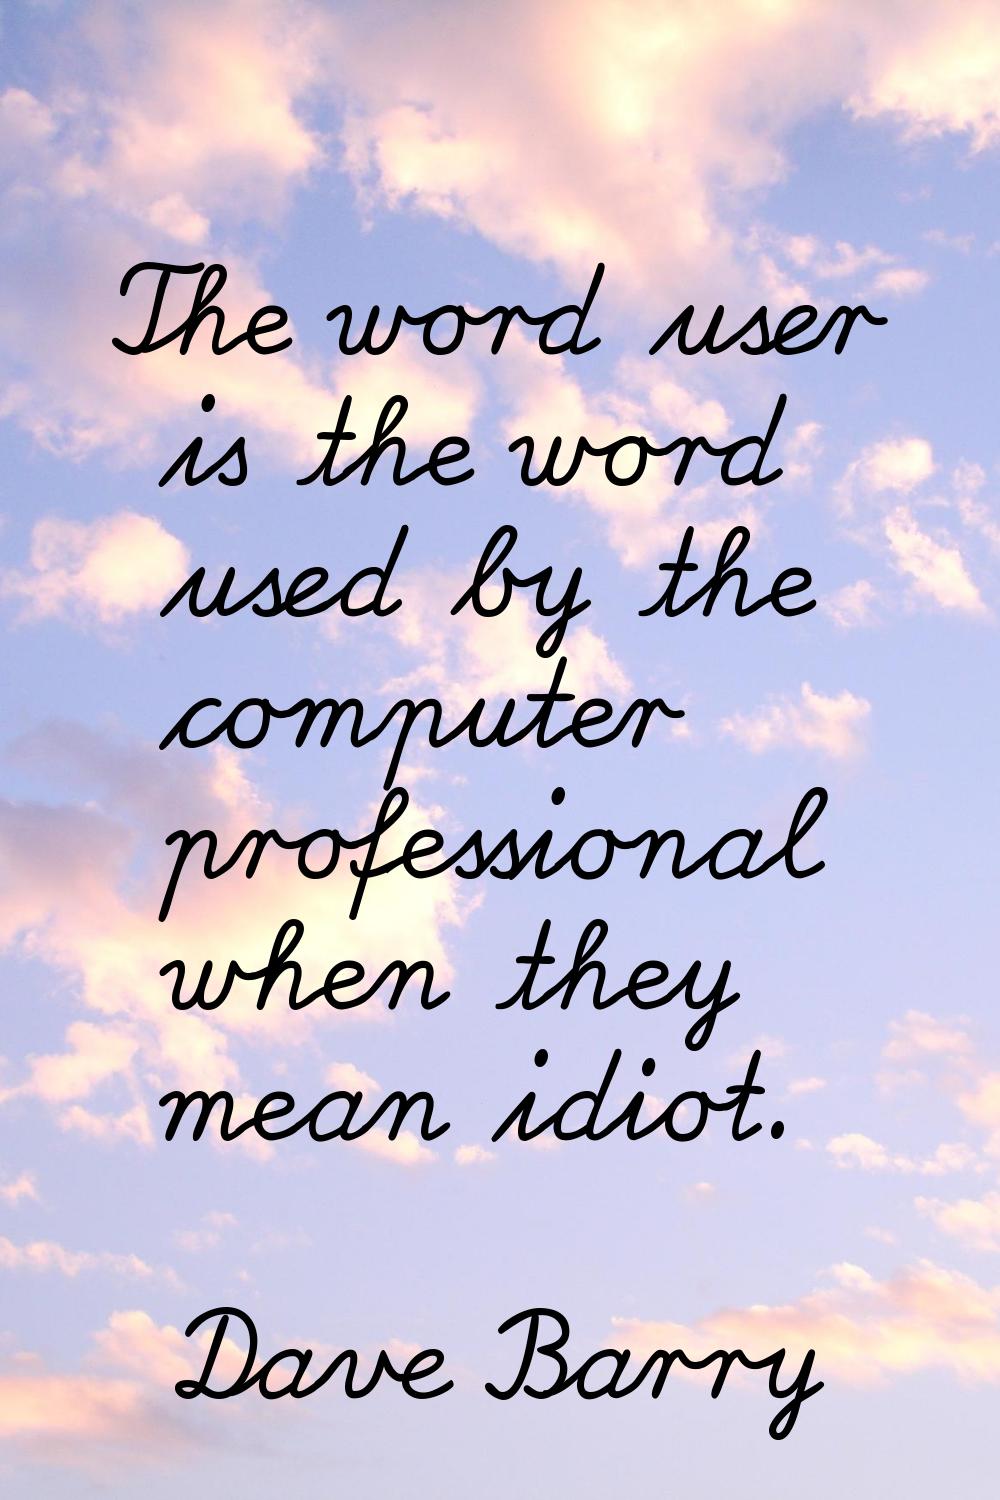 The word user is the word used by the computer professional when they mean idiot.